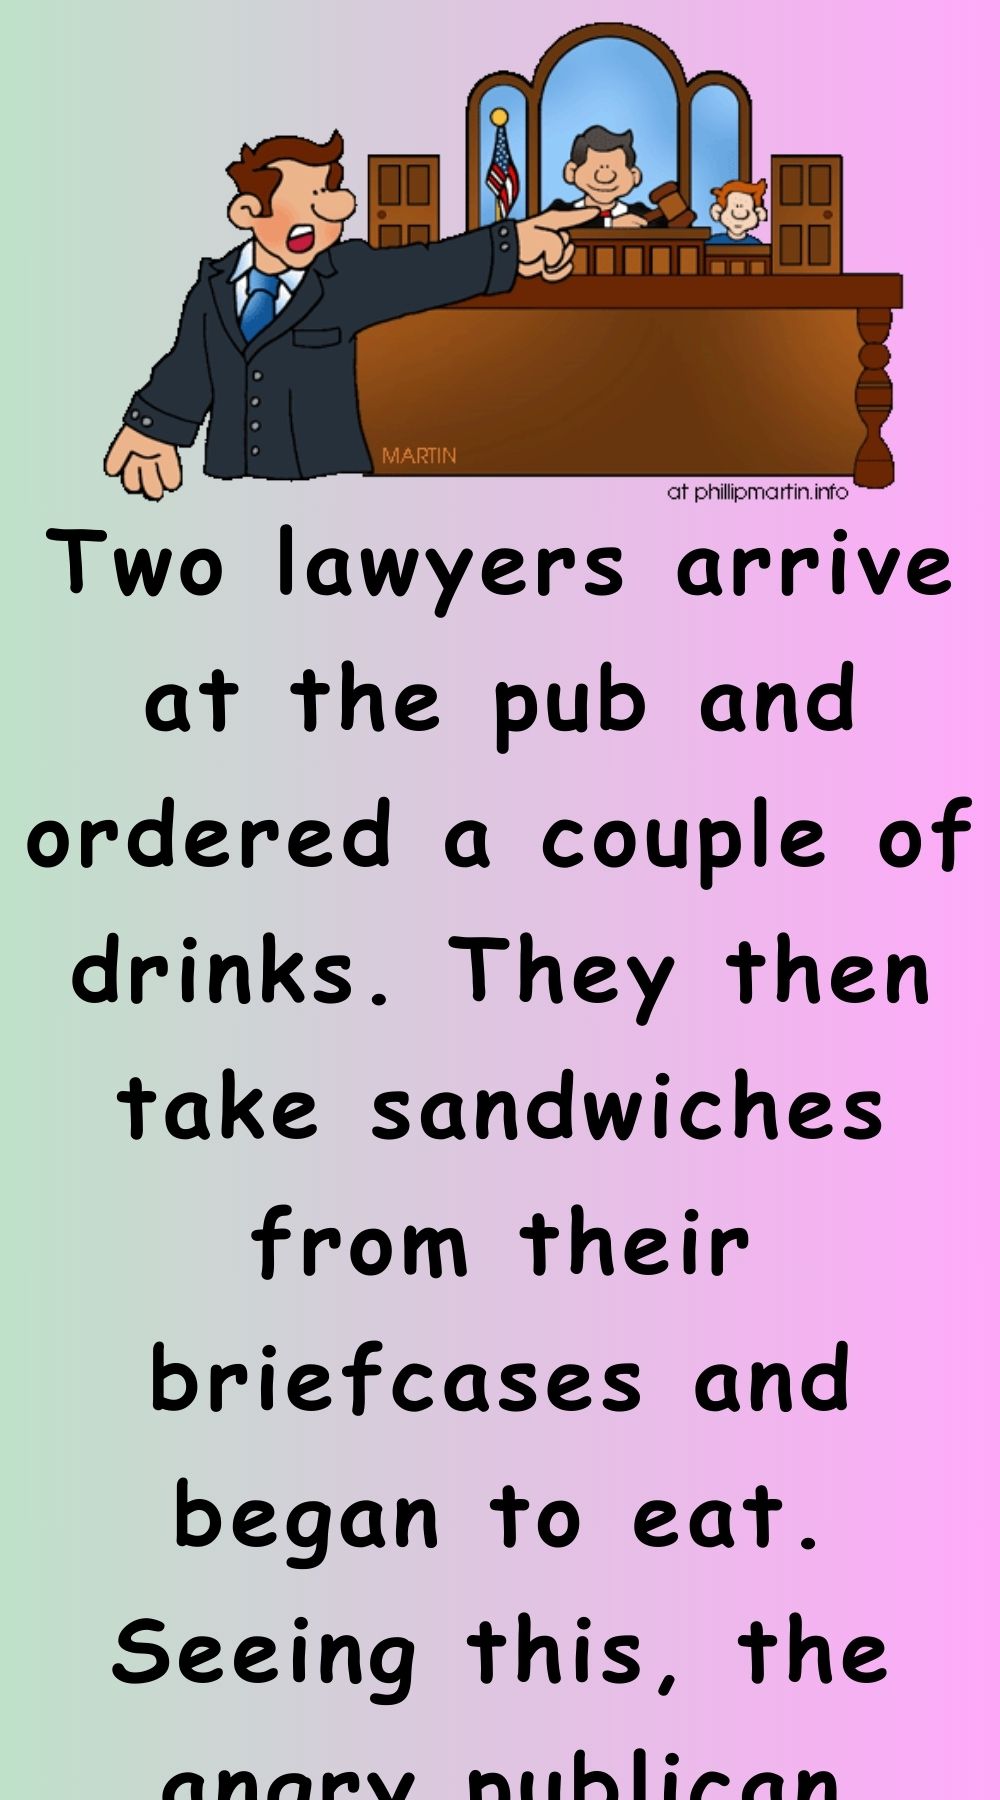 Two lawyers arrive at the pub and ordered